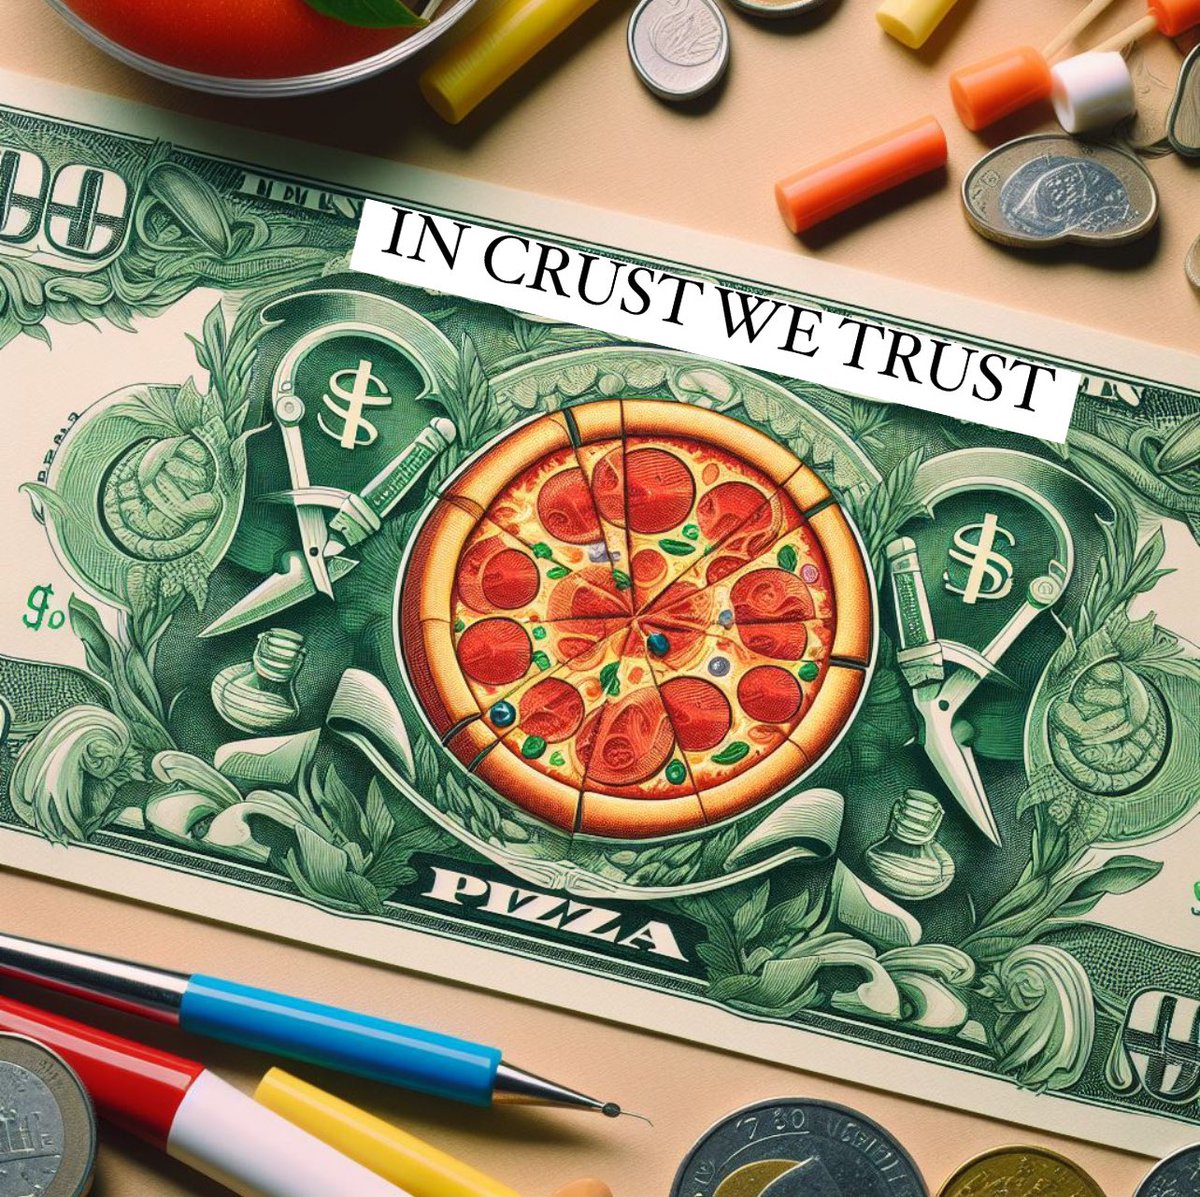 Who can help me with this edit? 😬😜
🍕🍕🍕🍕

$PIZA BRC20 is the strongest BTC memes 🔥🔥
( 22May 2024 Bitcoin Pizza Day)
#InCrustWeTrust

*Original photo in the comment area.

@btcpizzaxyz @pizabrc20_cn